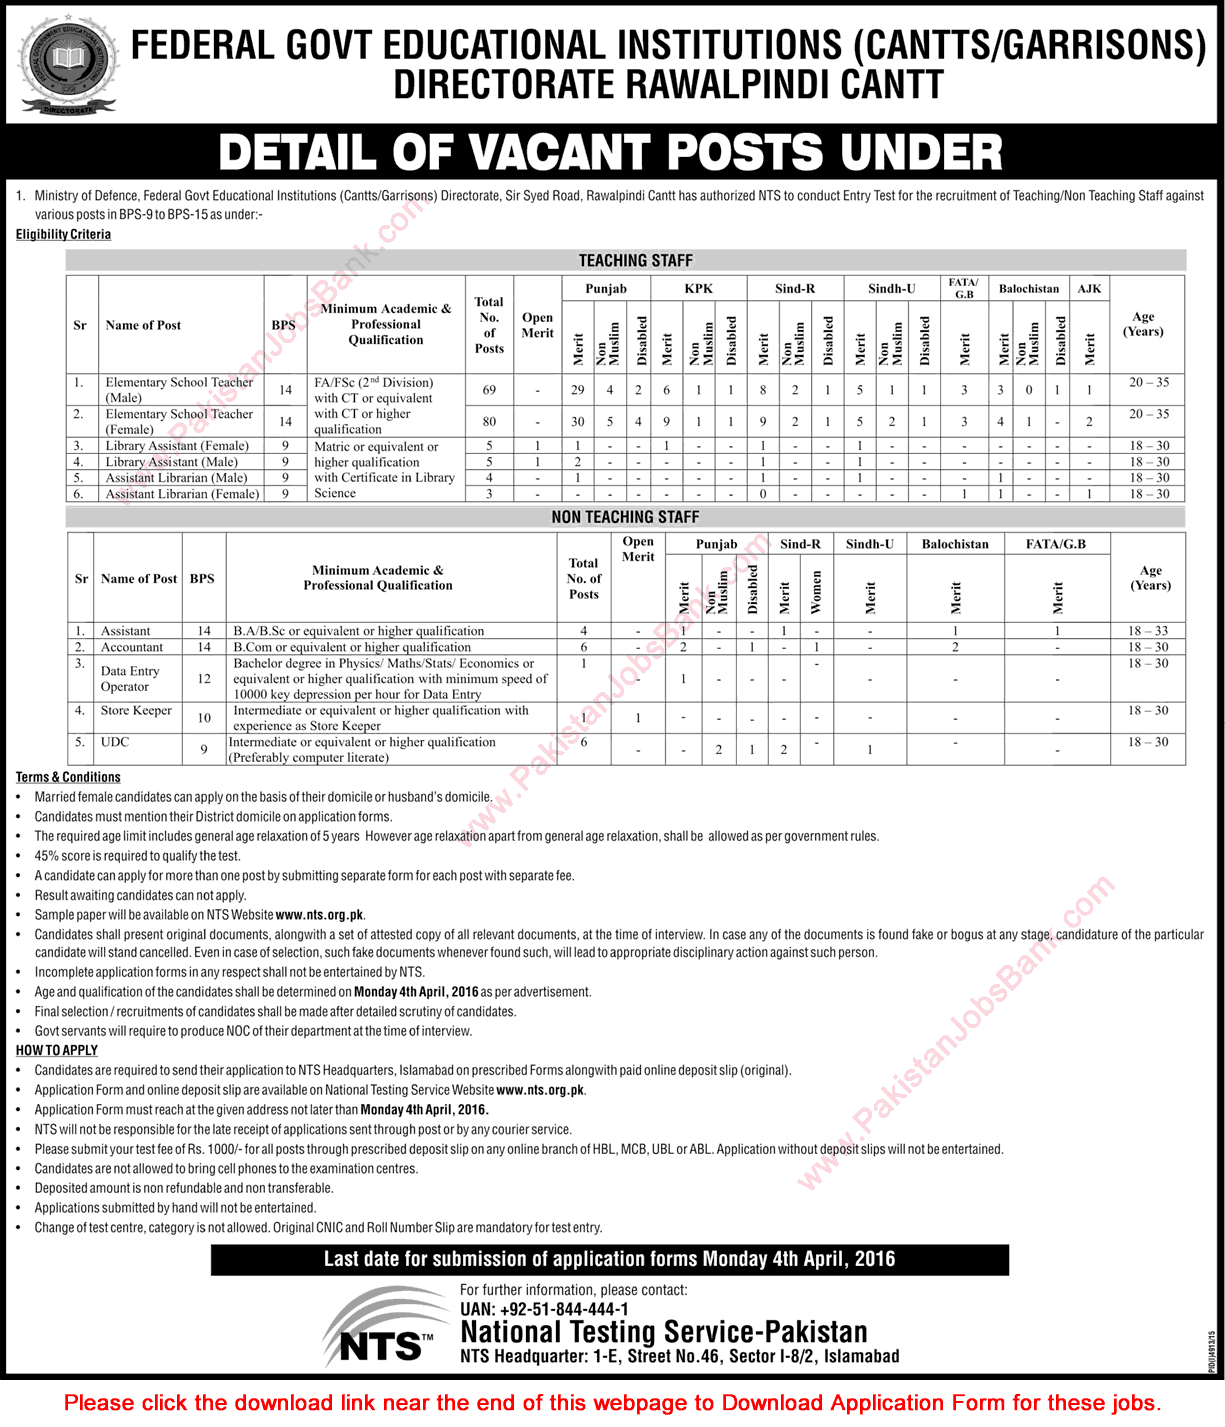 fgei-cg-jobs-2016-march-teachers-federal-government-educational-institutions-cantt-garrison-nts